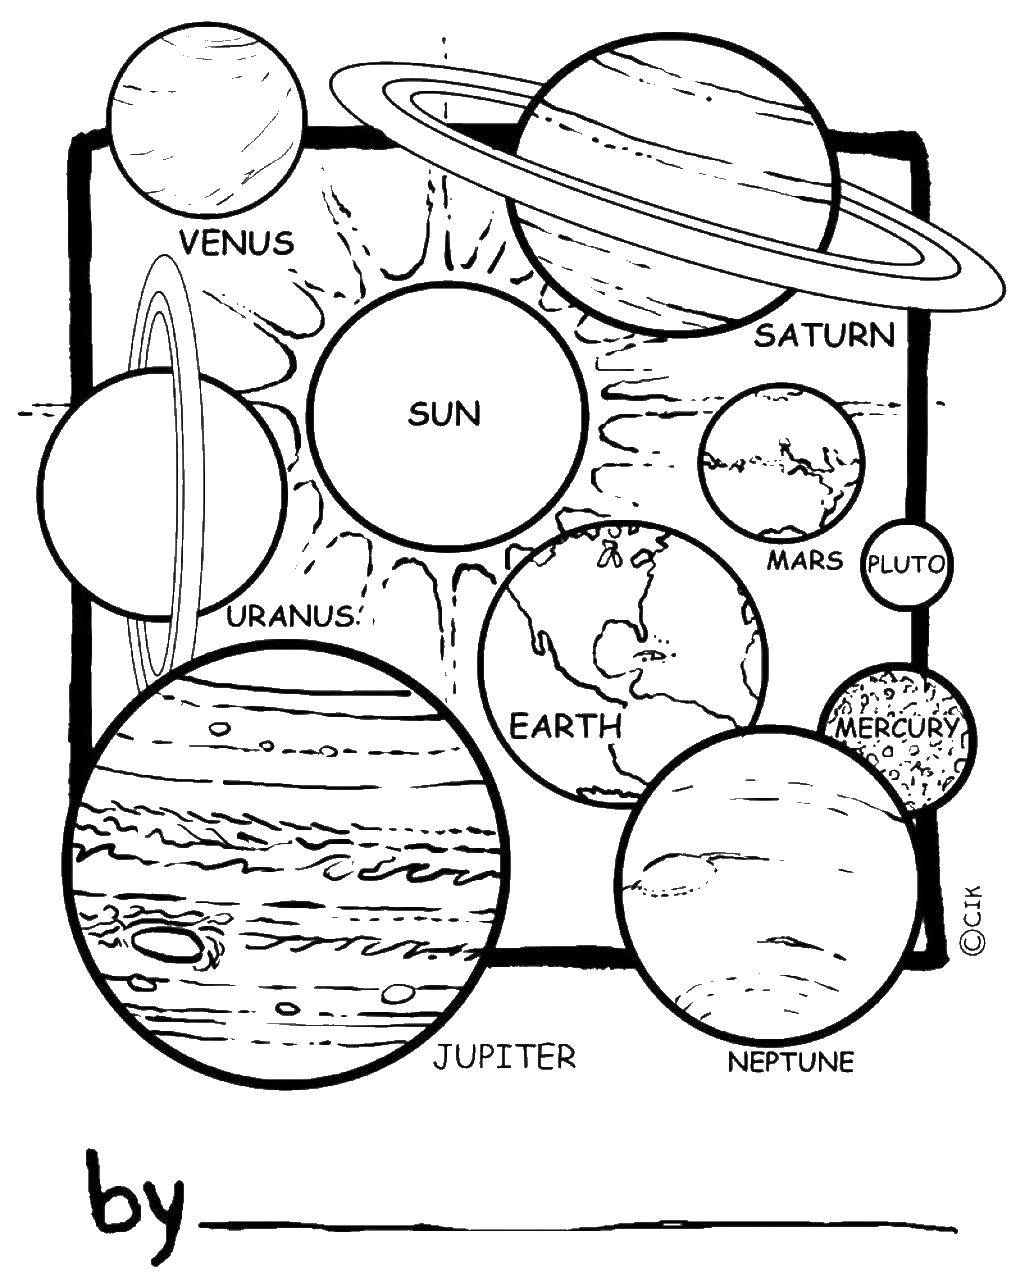 Coloring The structure of the planets. Category Space coloring pages. Tags:  the planet.